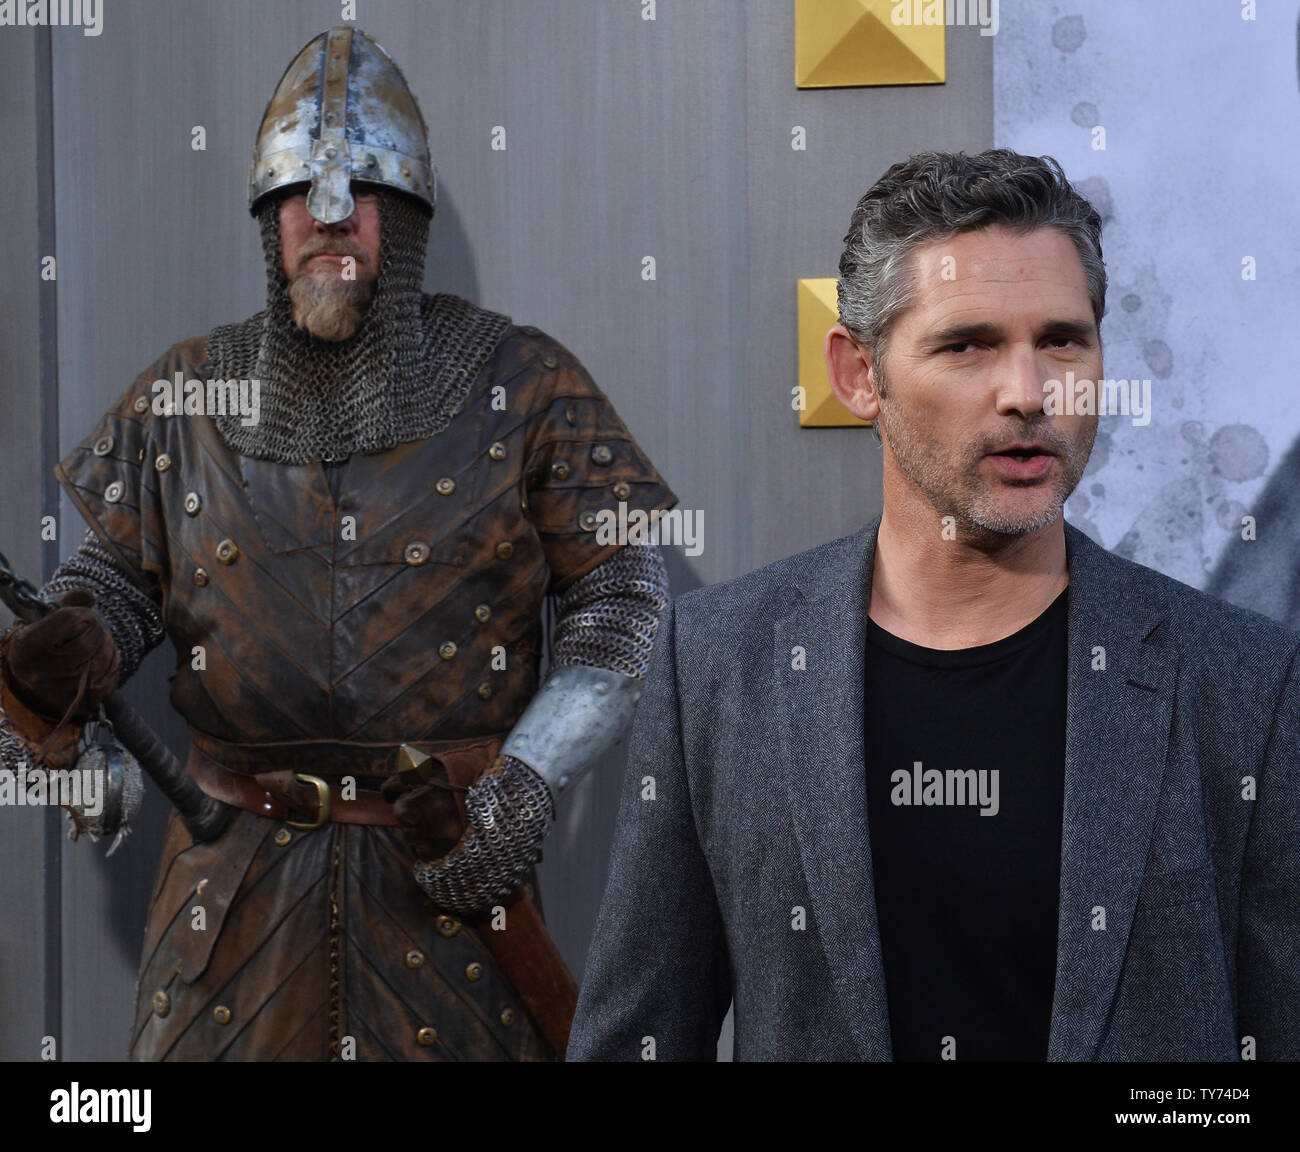 Cast member Eric Bana attends the premiere of the motion picture fantasy "King  Arthur: Legend of the Sword" at TCL Chinese Theatre in the Hollywood  section of Los Angeles on May 8,